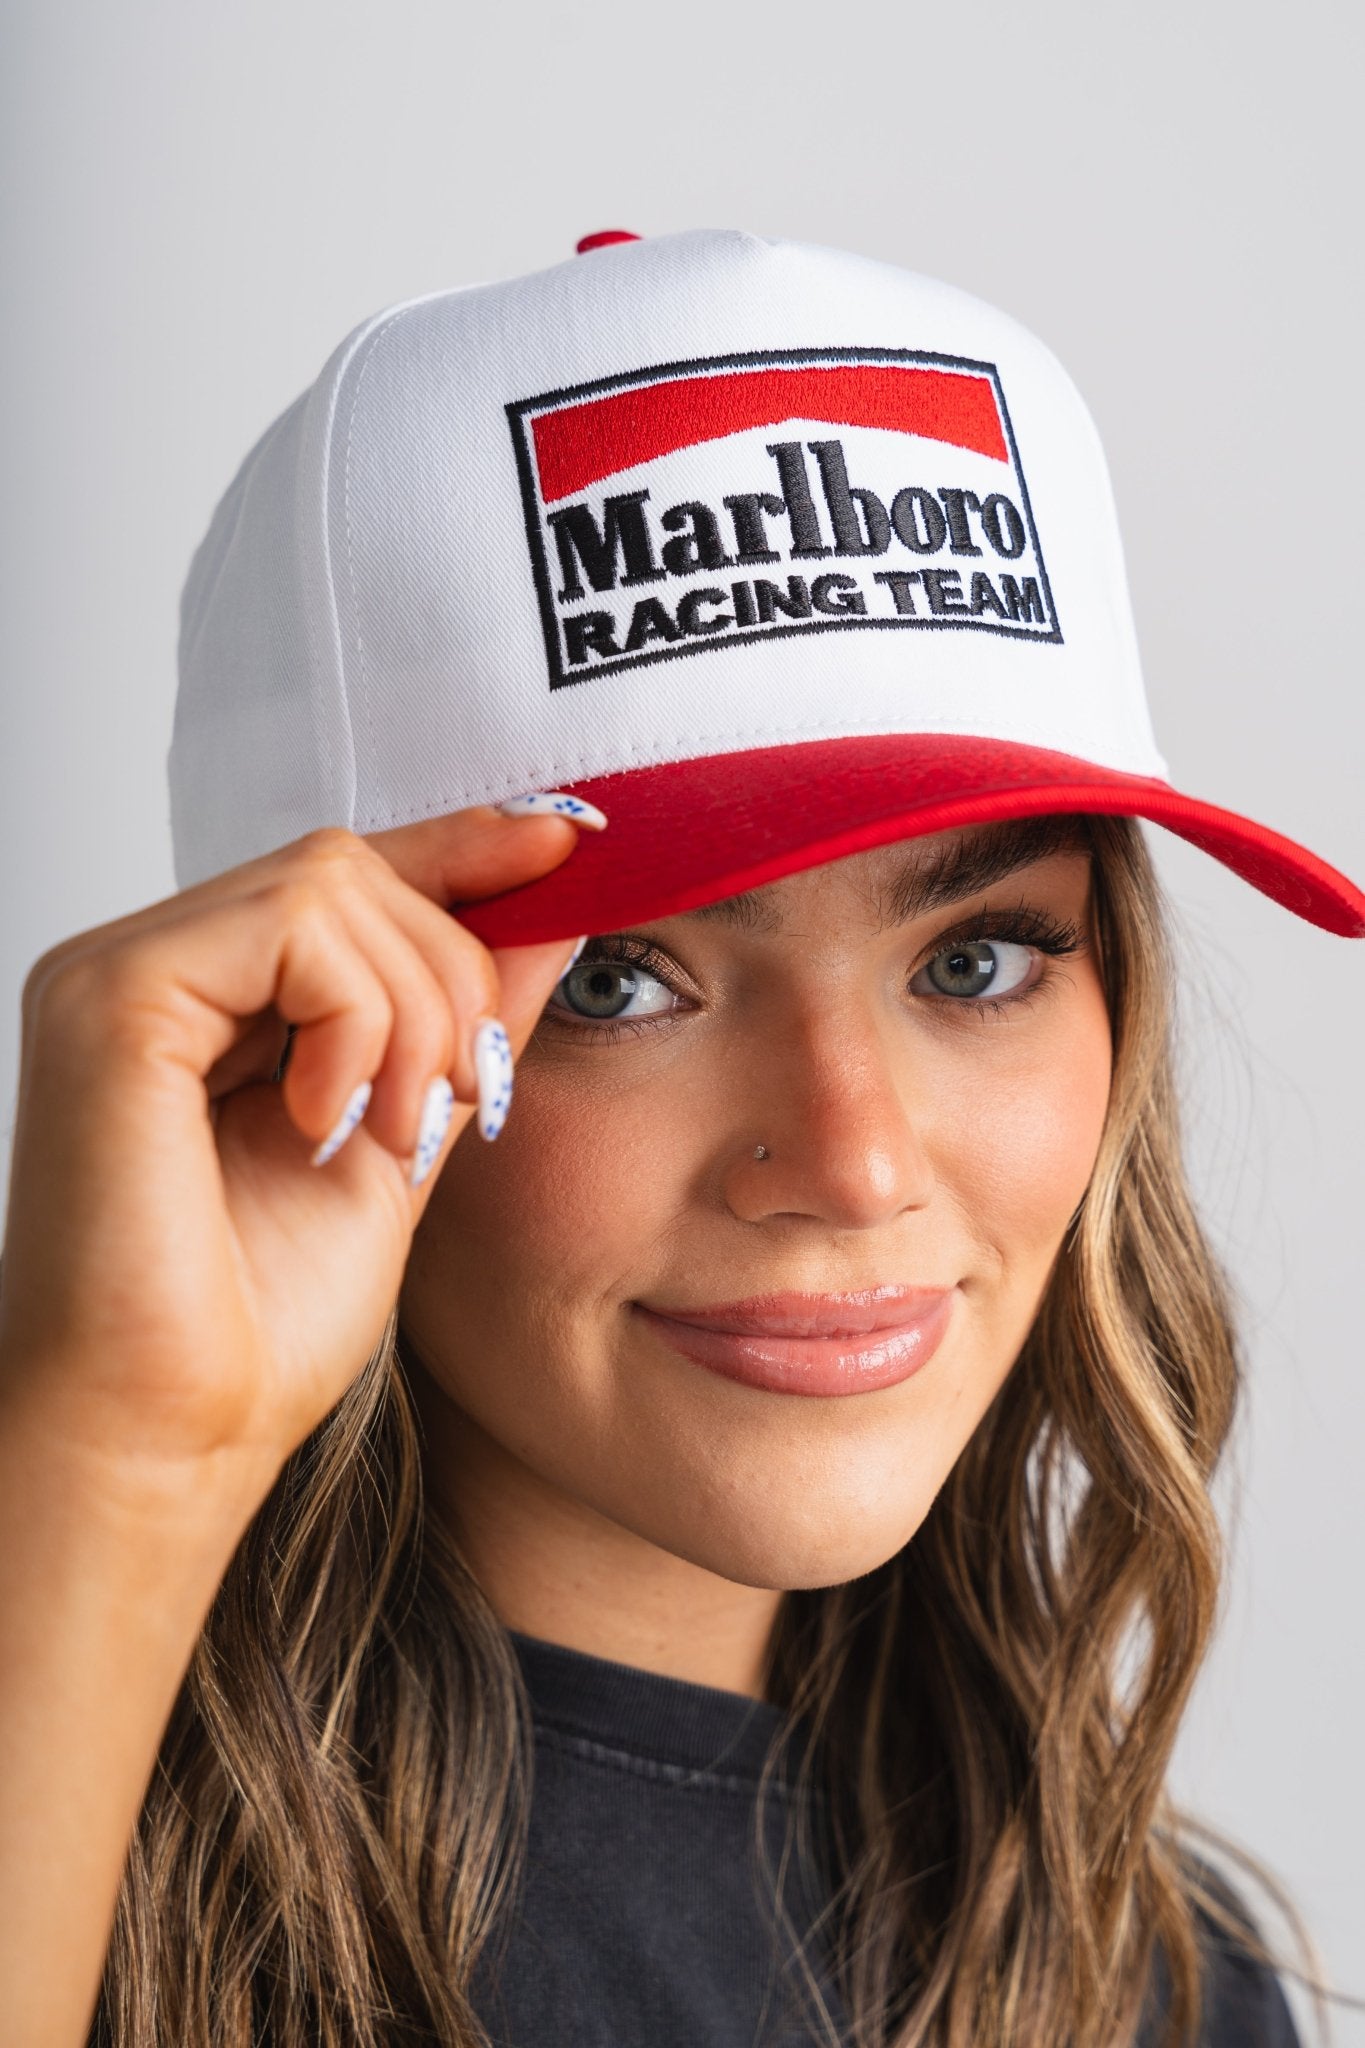 Marlboro racing vintage hat white/red - Trendy Hats at Lush Fashion Lounge Boutique in Oklahoma City